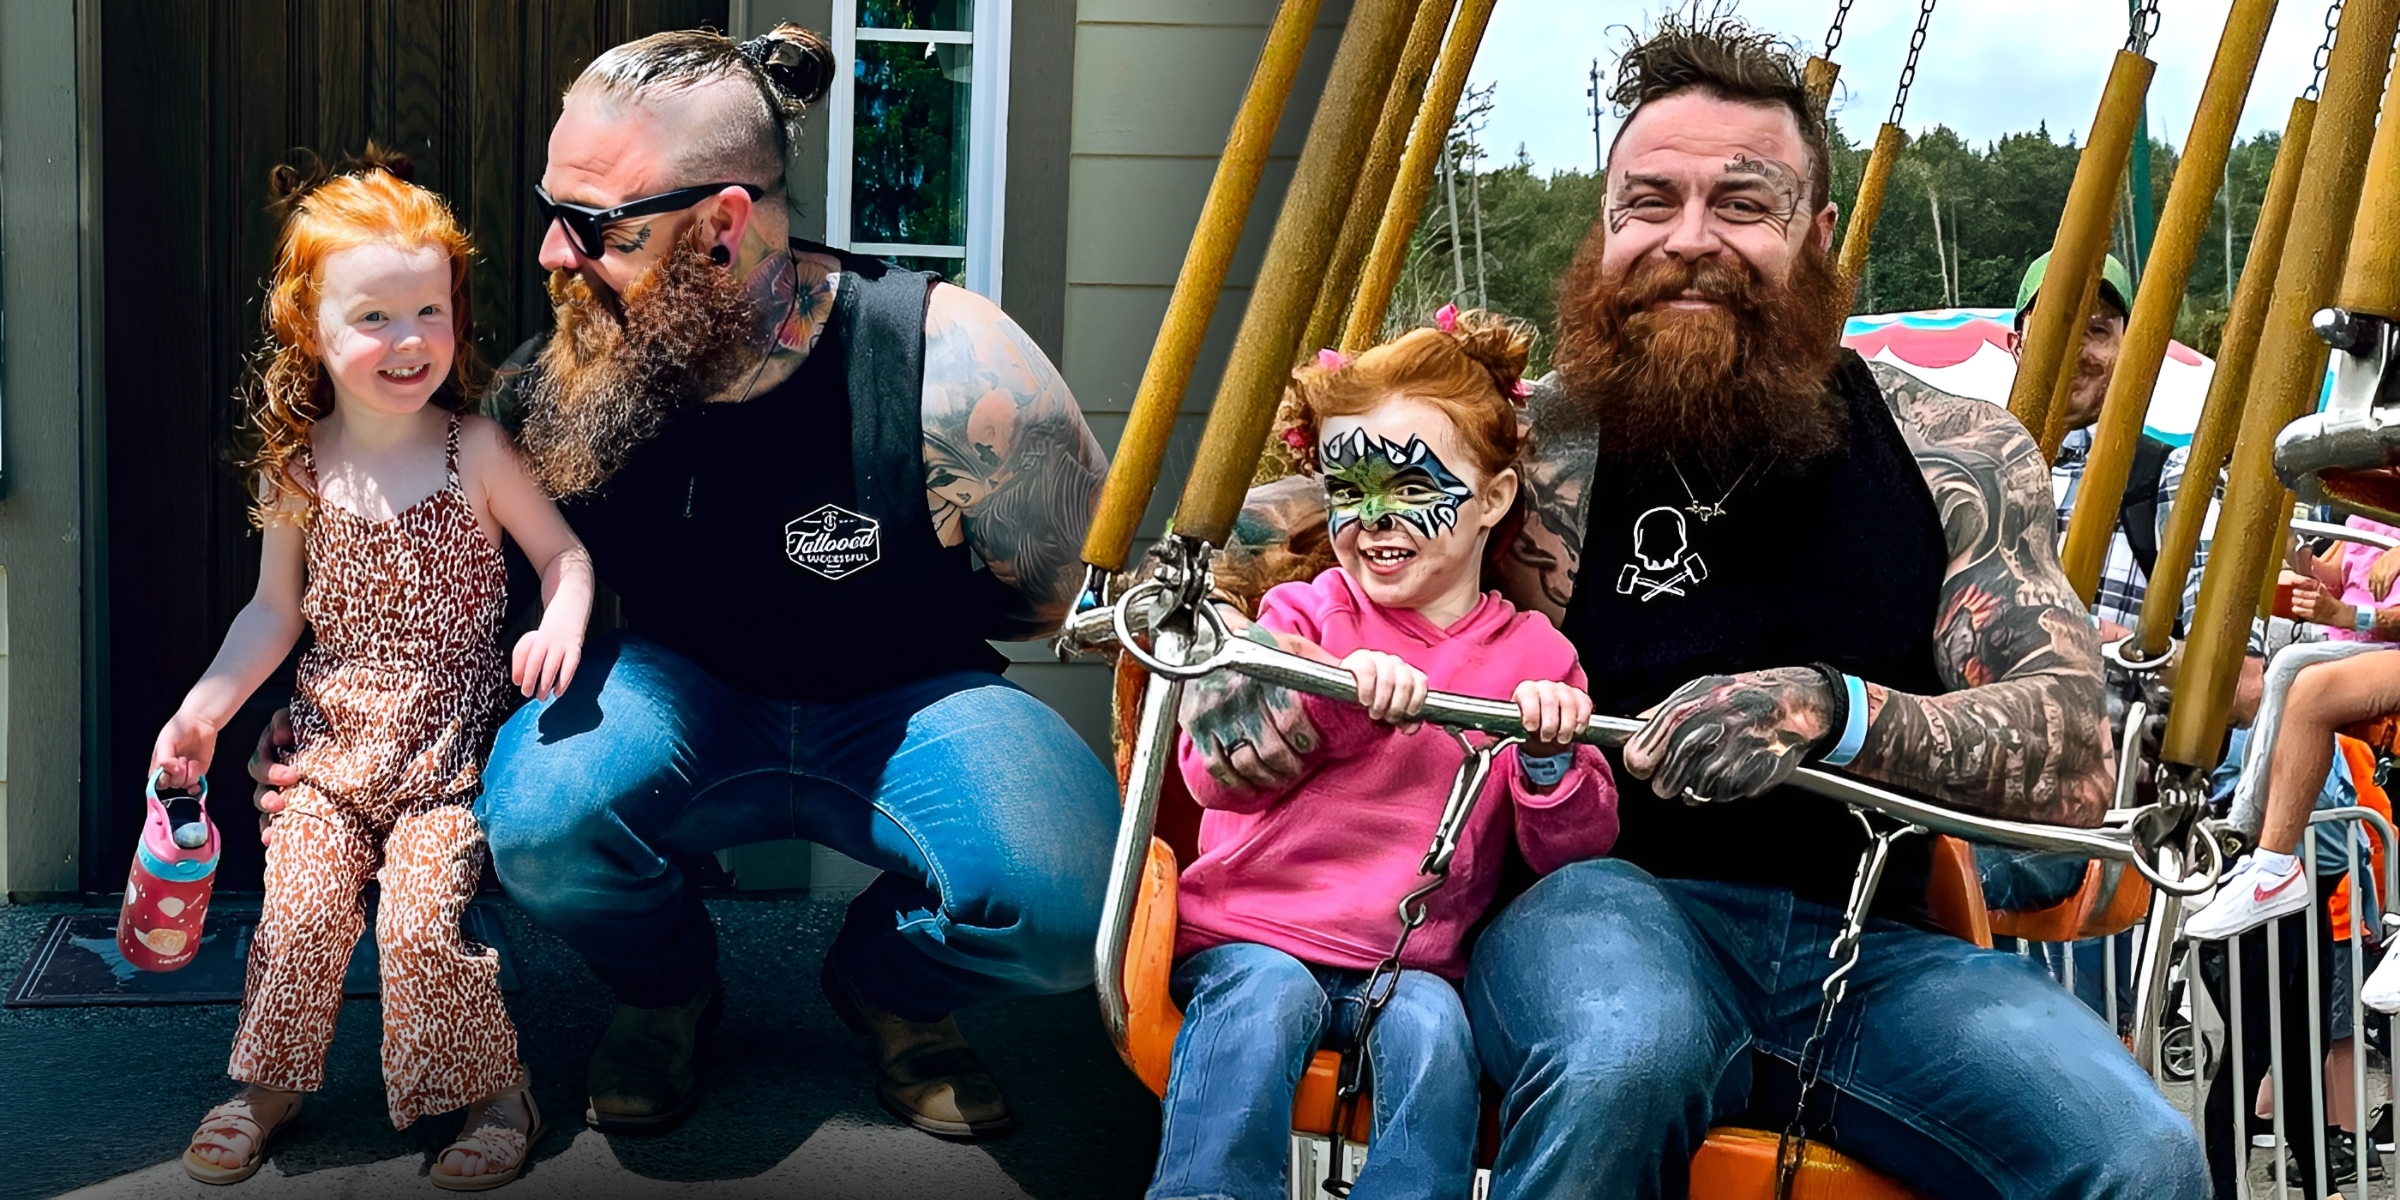 Kevin Clevenger and his daughter Viola | Source: Instagram.com/ironsanctuary